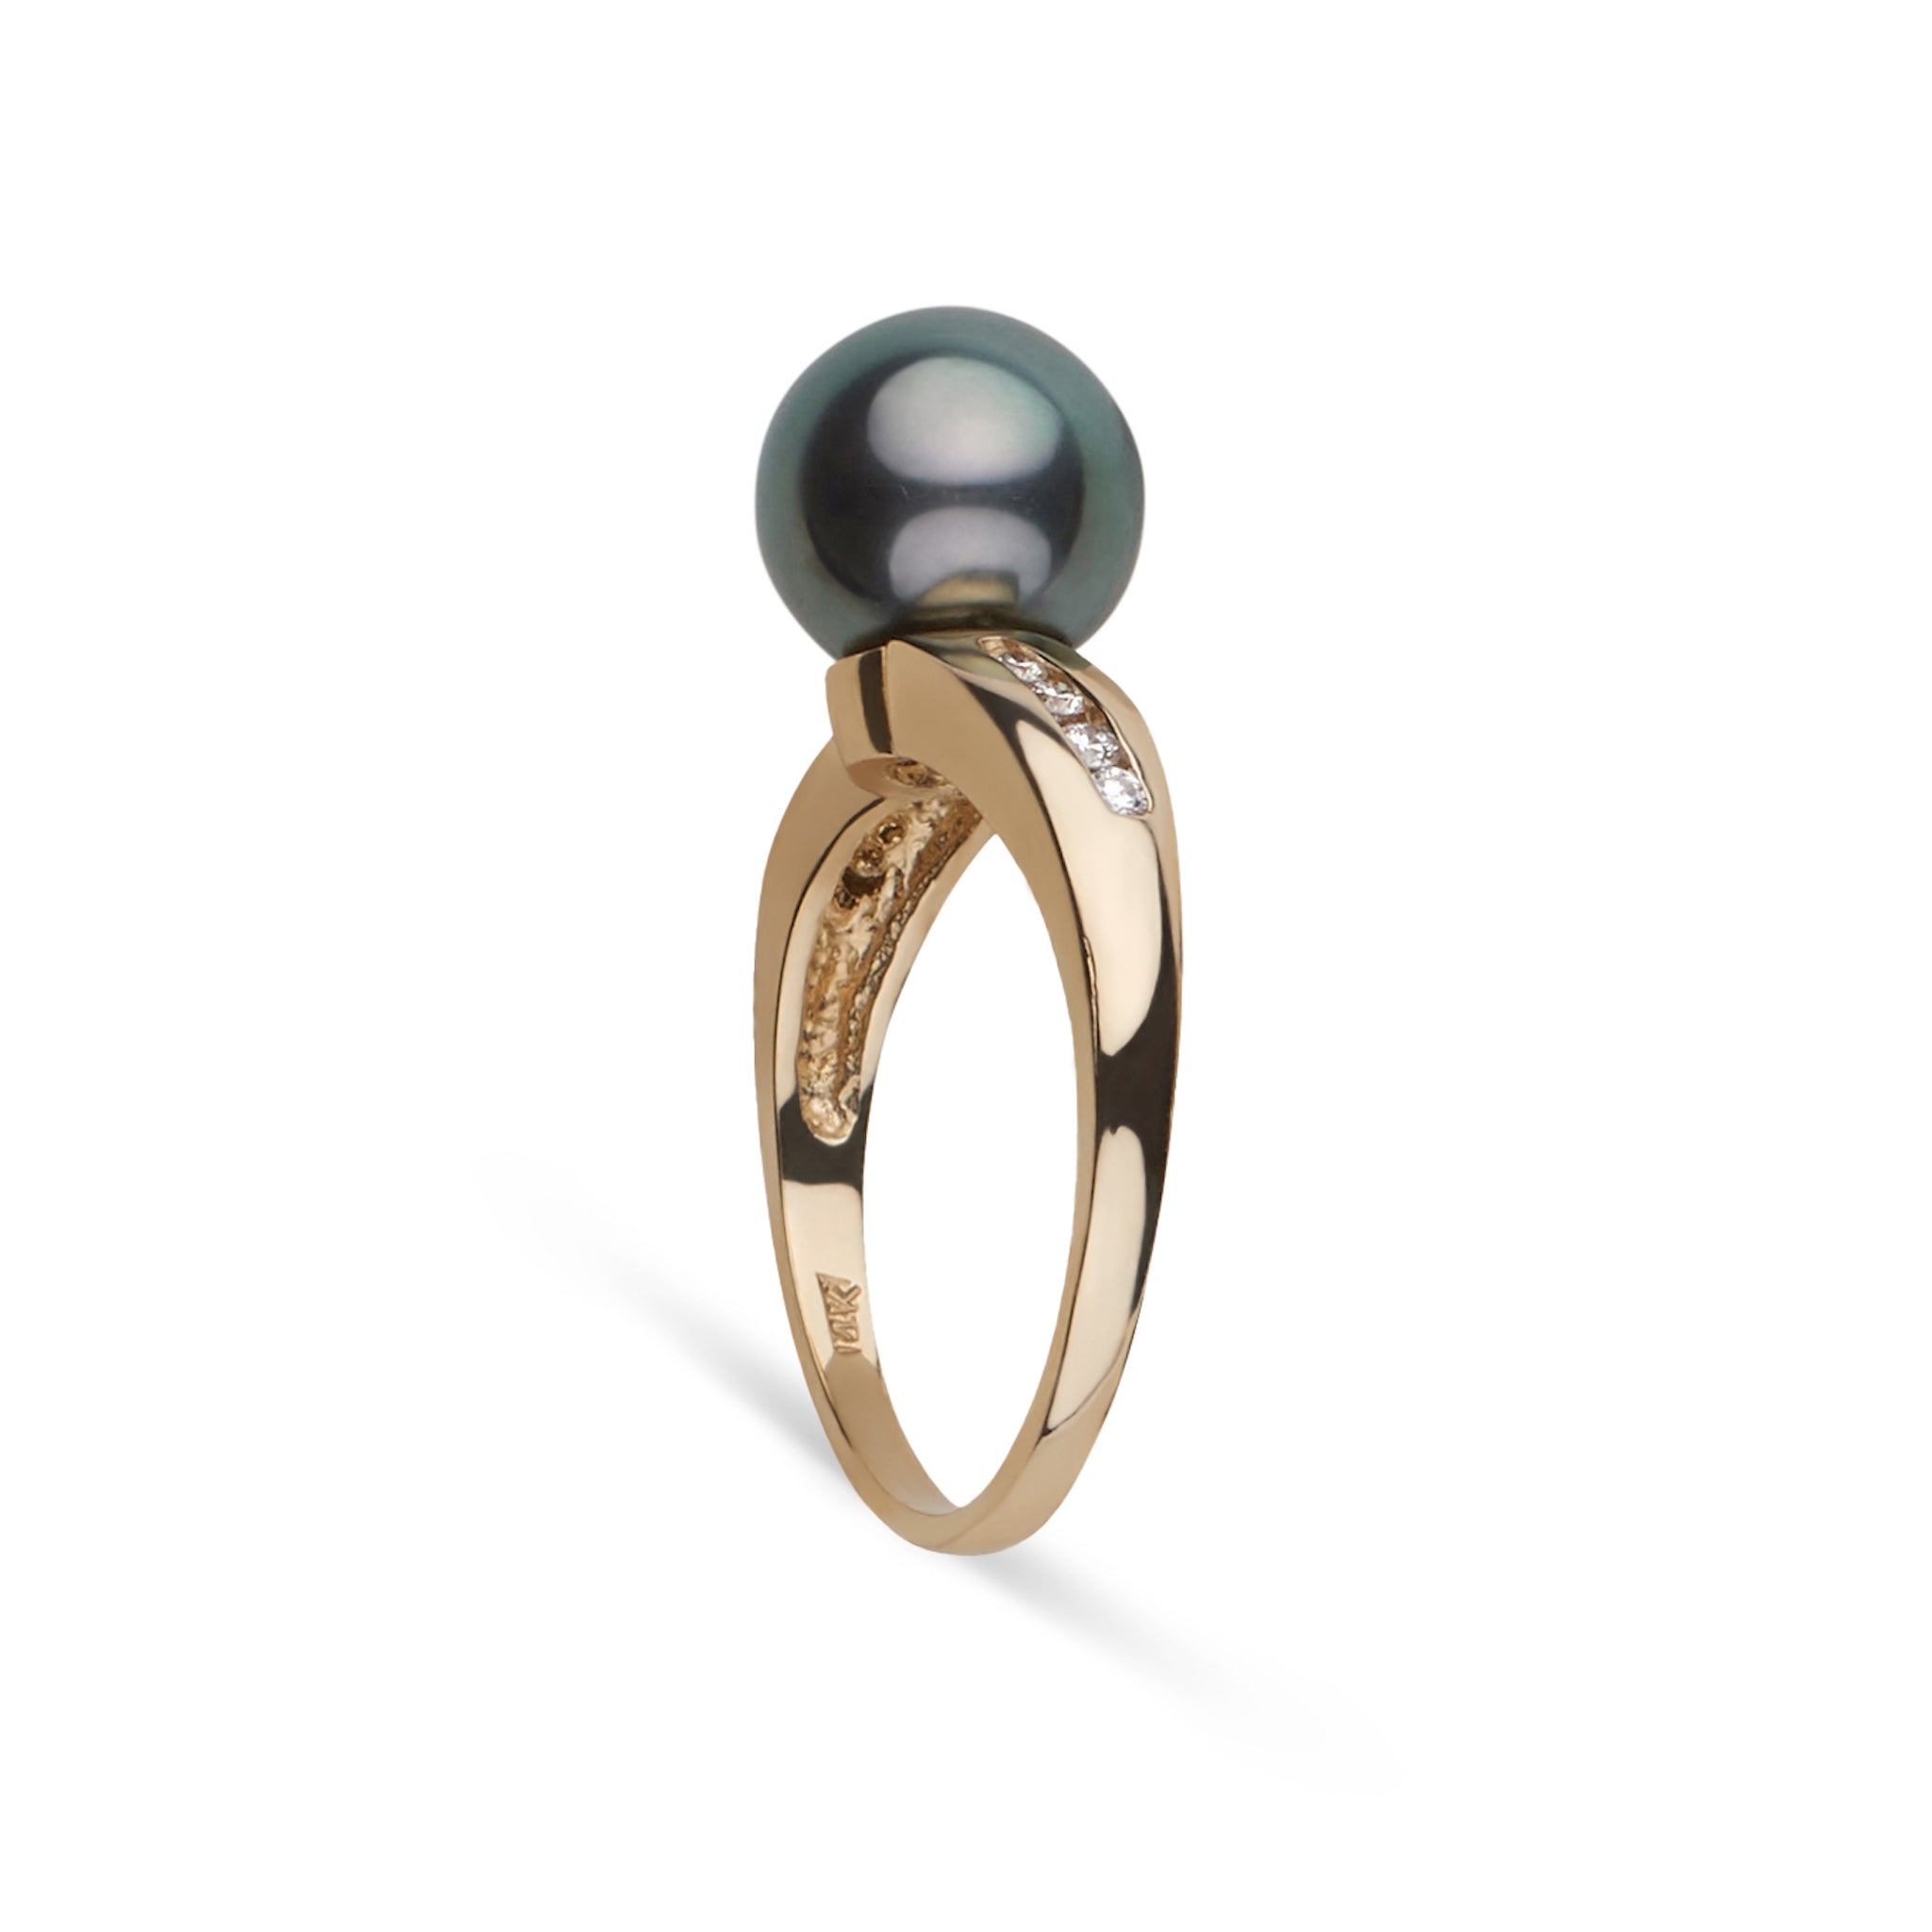 Desire Collection 9.0-10.0 mm Tahitian Pearl and Diamond Ring